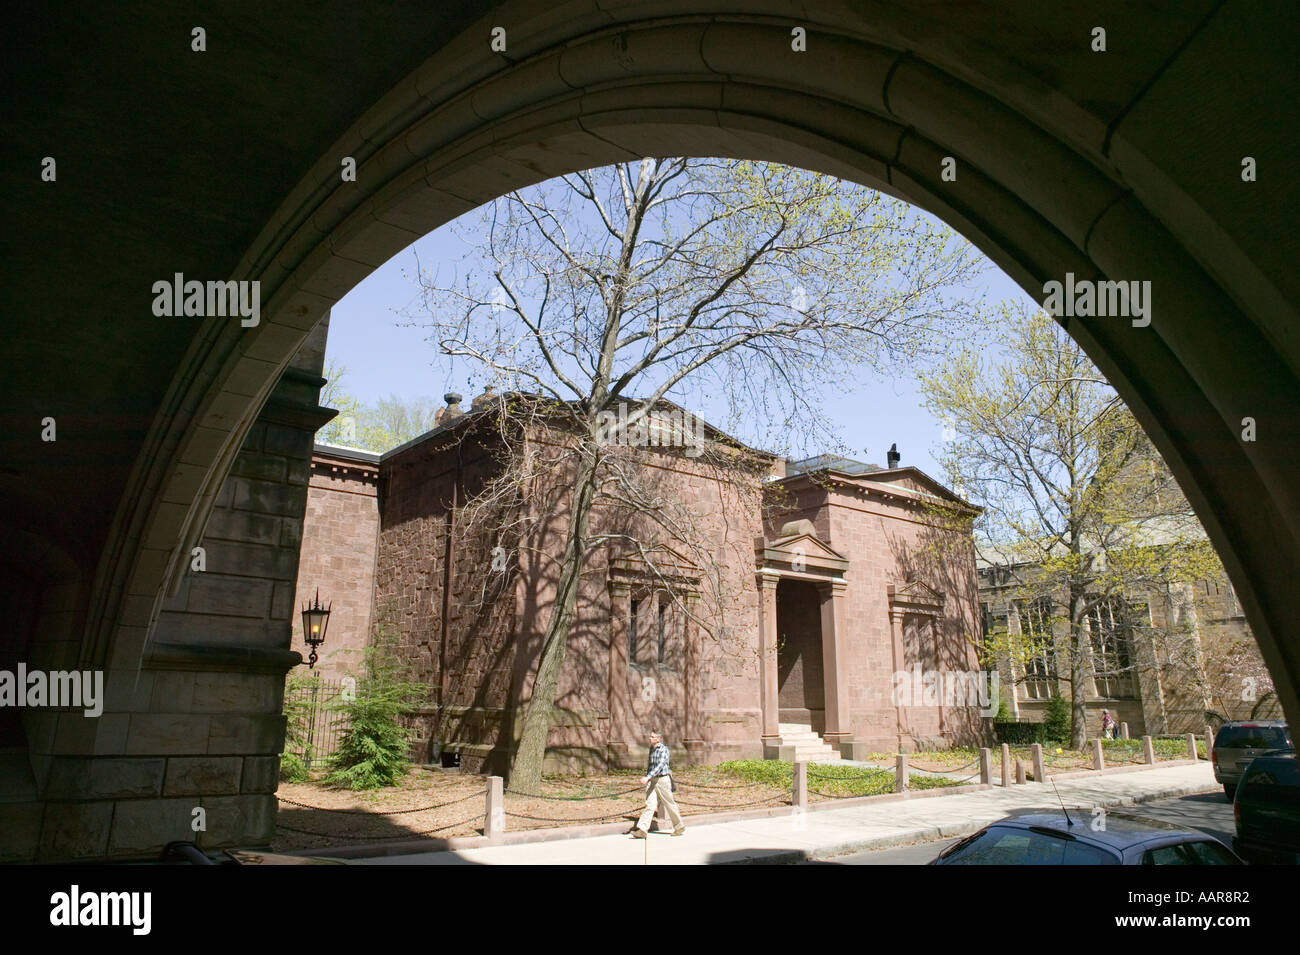 Exterior Of The Skull And Bones Secret Student Society On The Yale